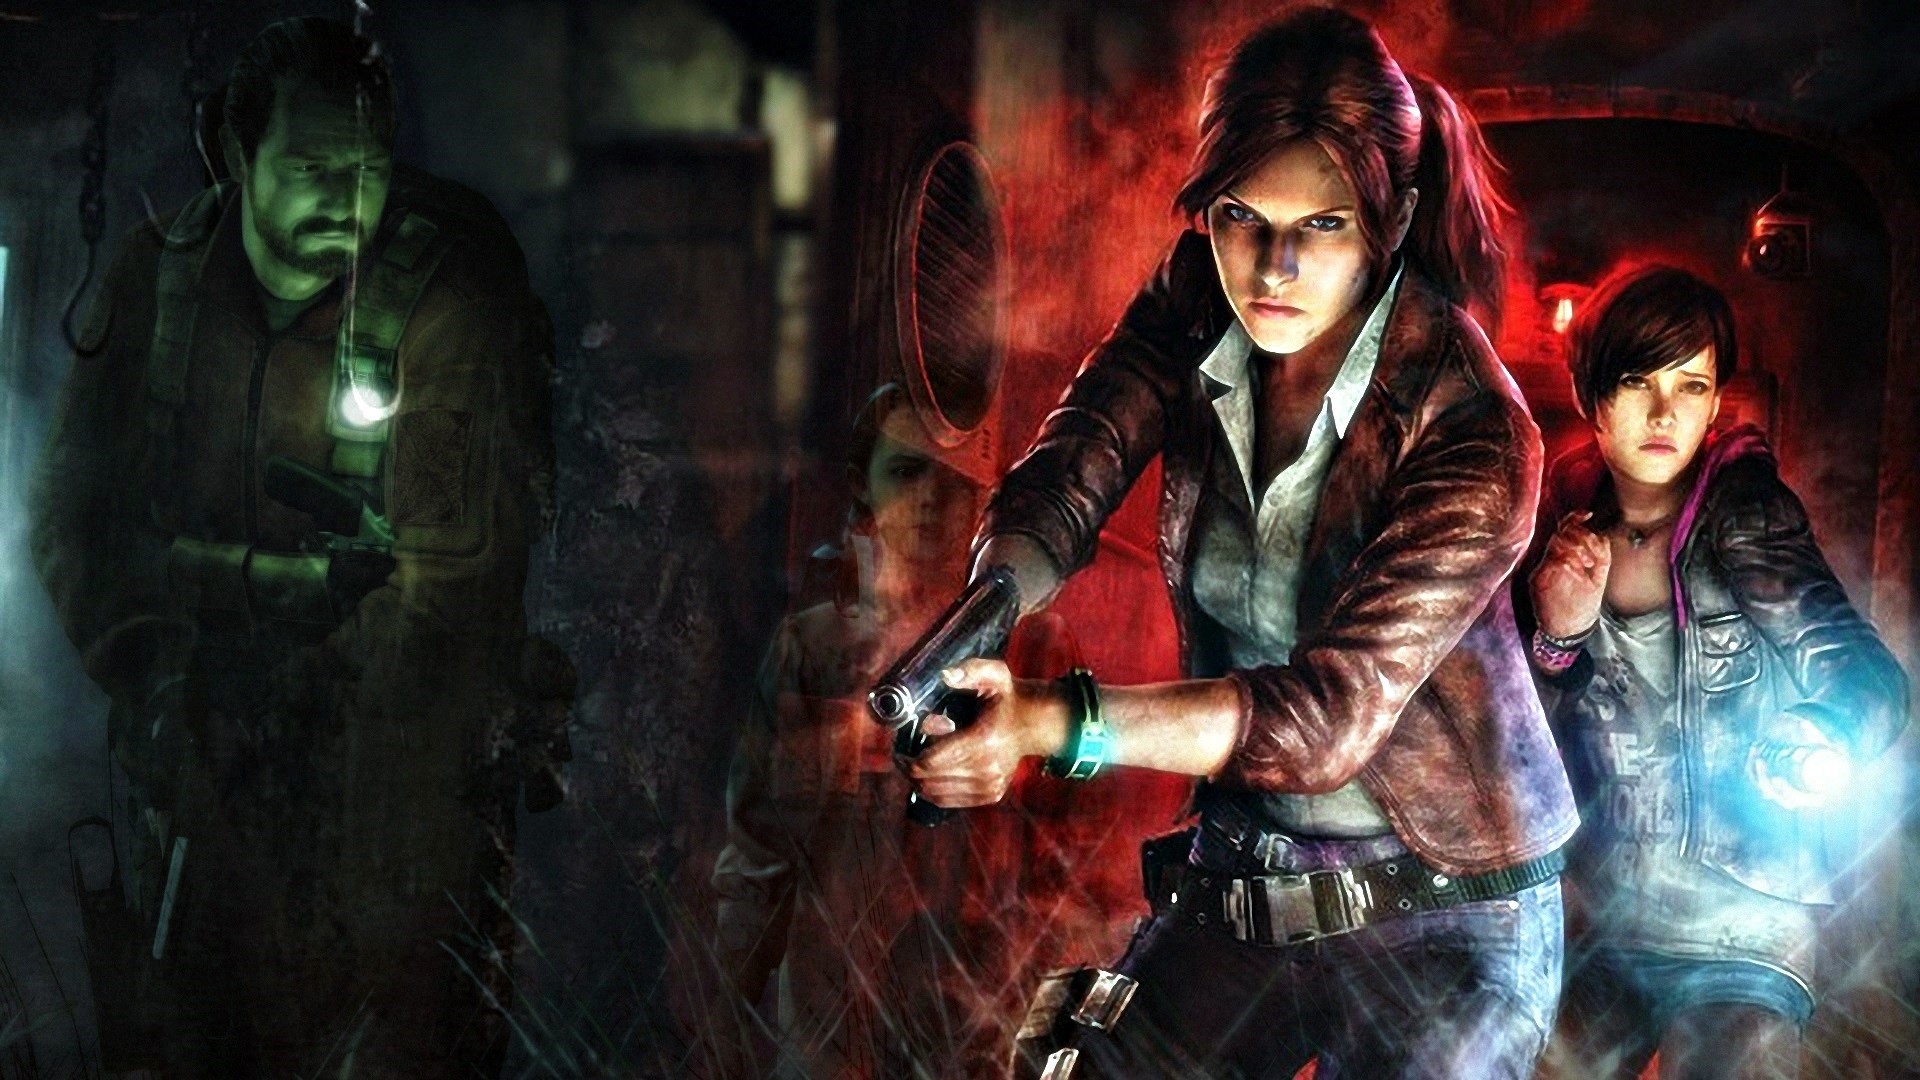 1920x1080 Search Results for “resident evil revelations hd wallpaper” – Adorable  Wallpapers